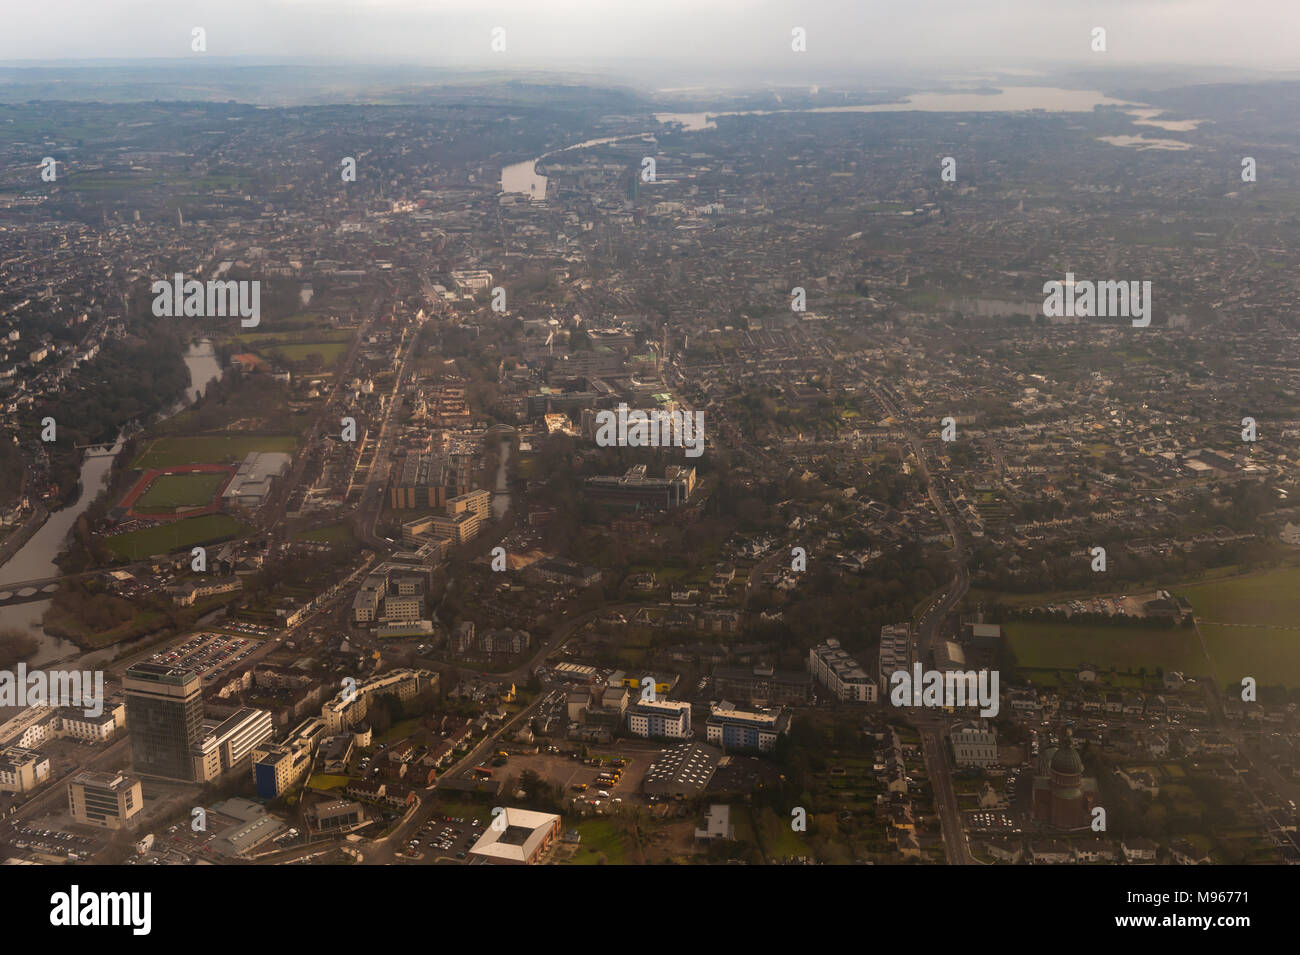 Cork and Cork City, Ireland, from the air. Stock Photo